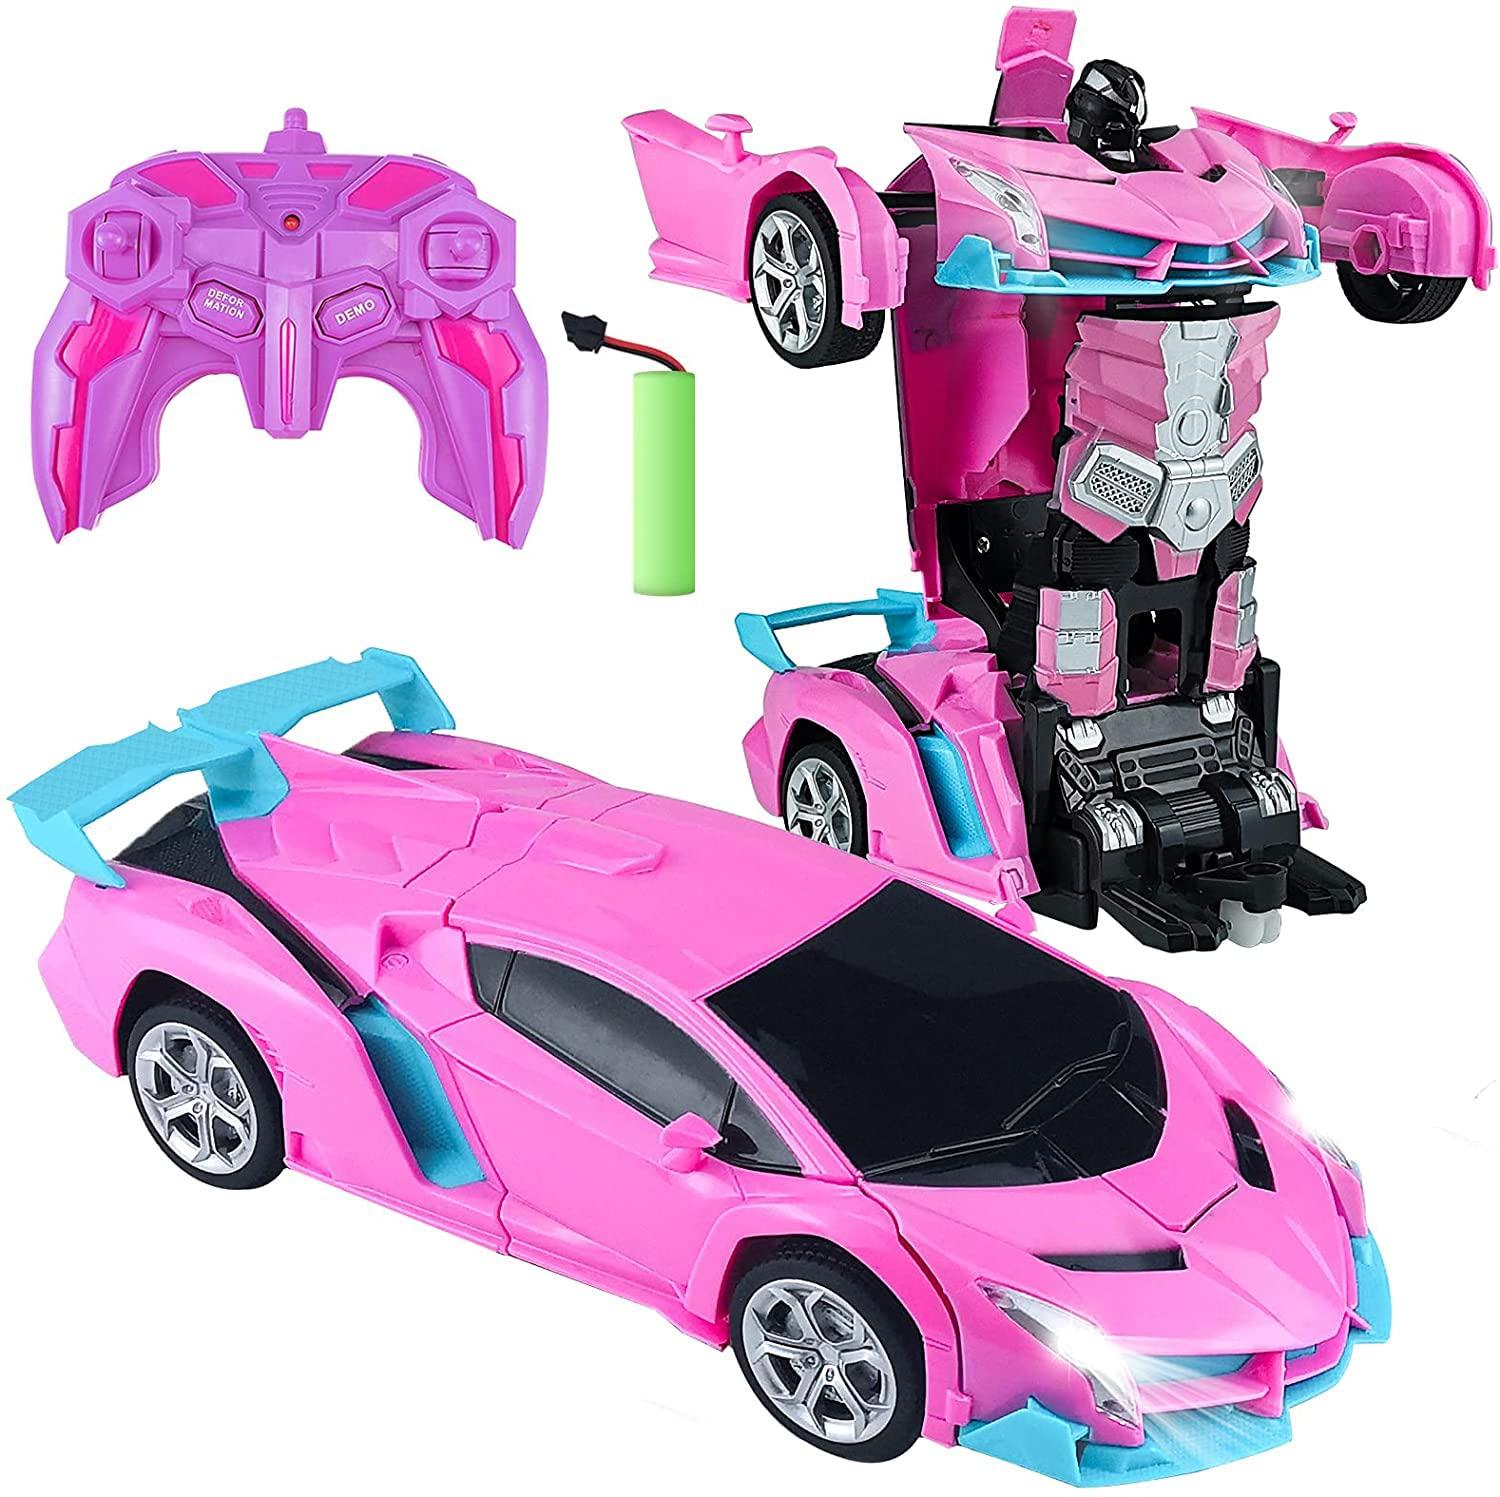 Pink Rc Car:  Maintenance and care